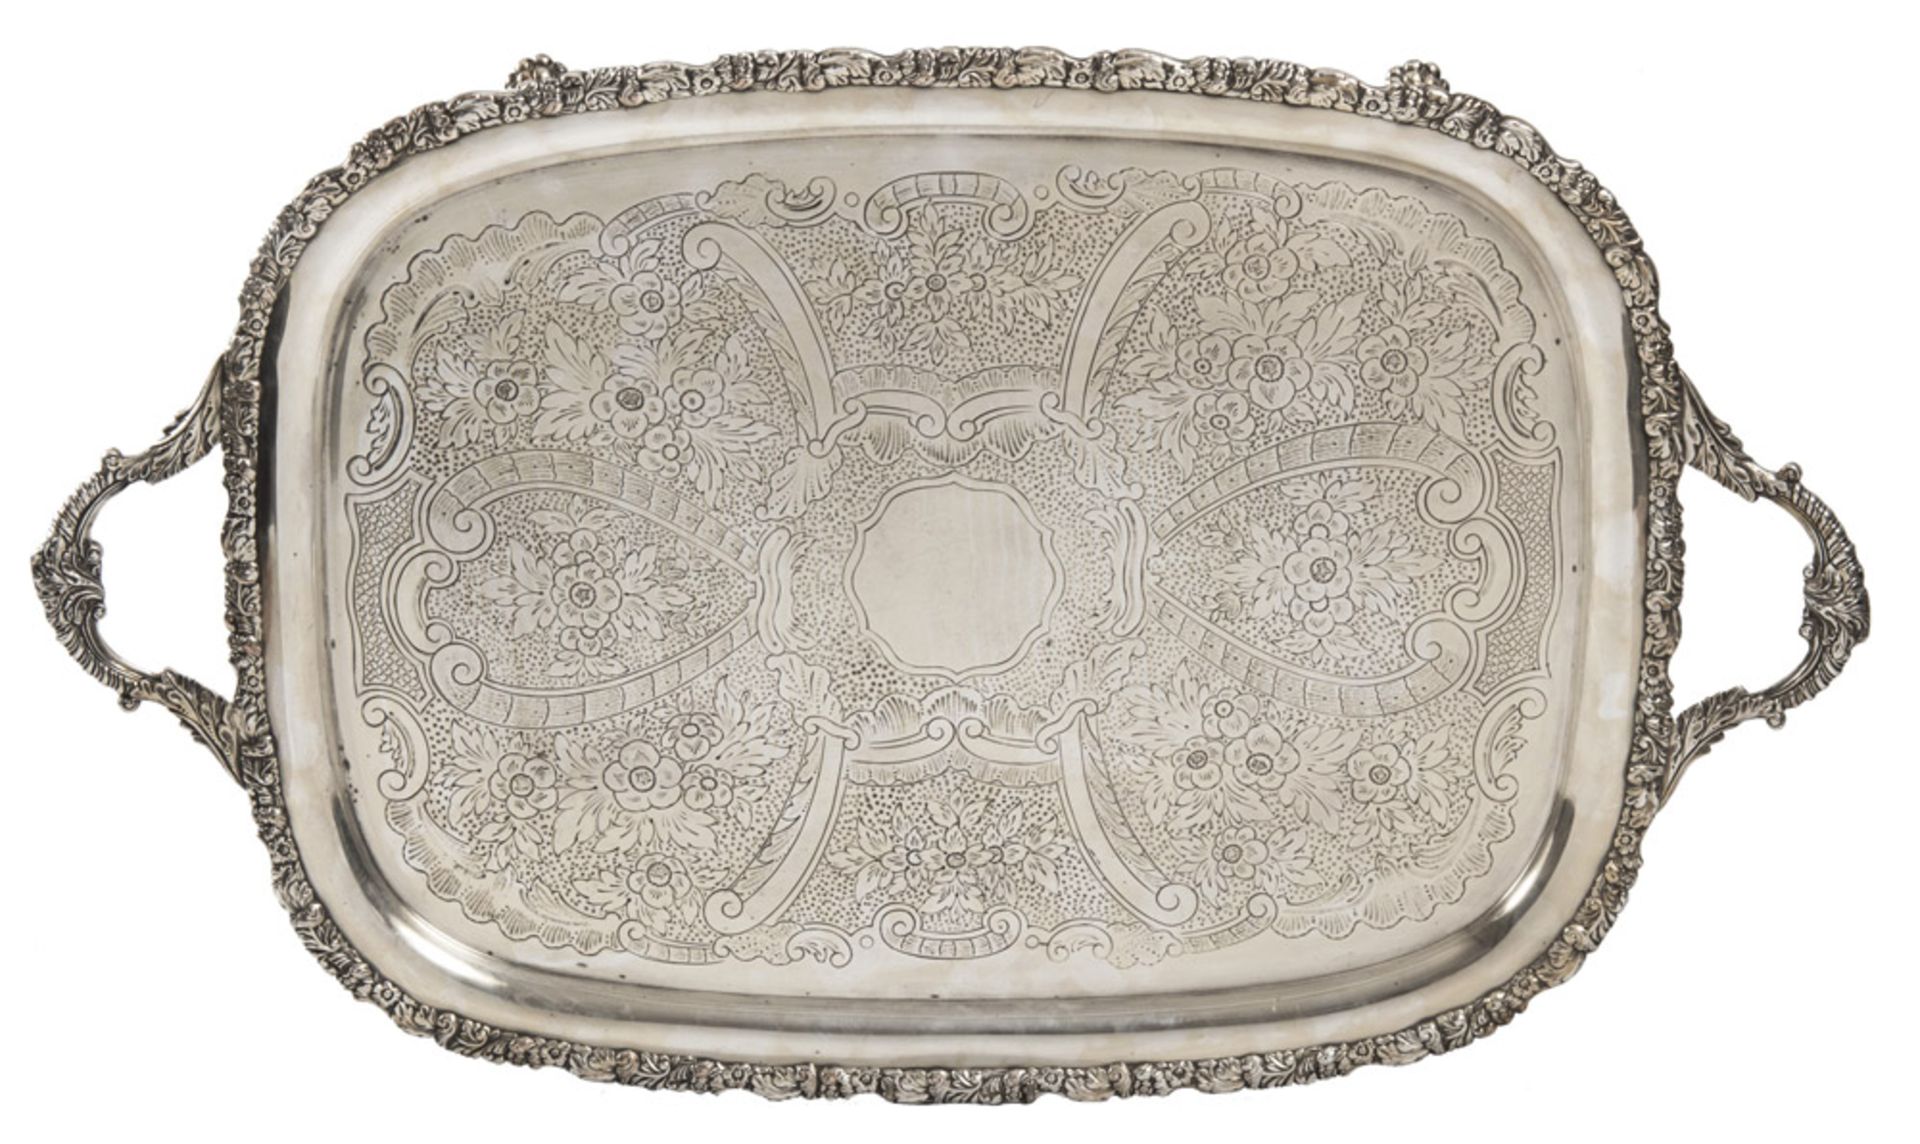 BIG SHEFFIELD TRAY, EARLY 20TH CENTURY entirely engraved to floral motives, volutes and leaves. Edge